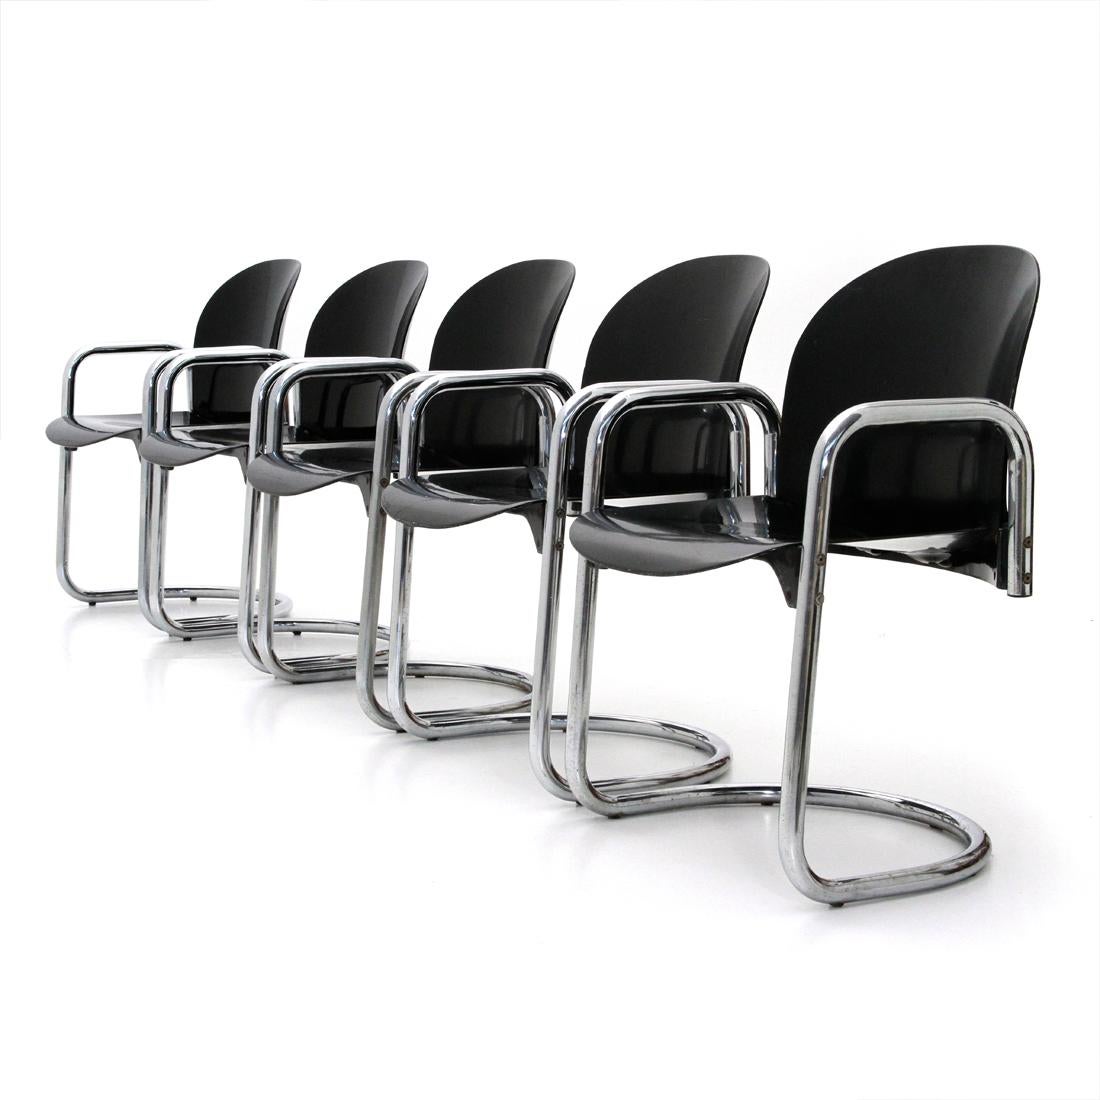 Late 20th Century Dialogo Chromed Dining Chair by Tobia Scarpa for B&B Italia, 1970s, Set of Five